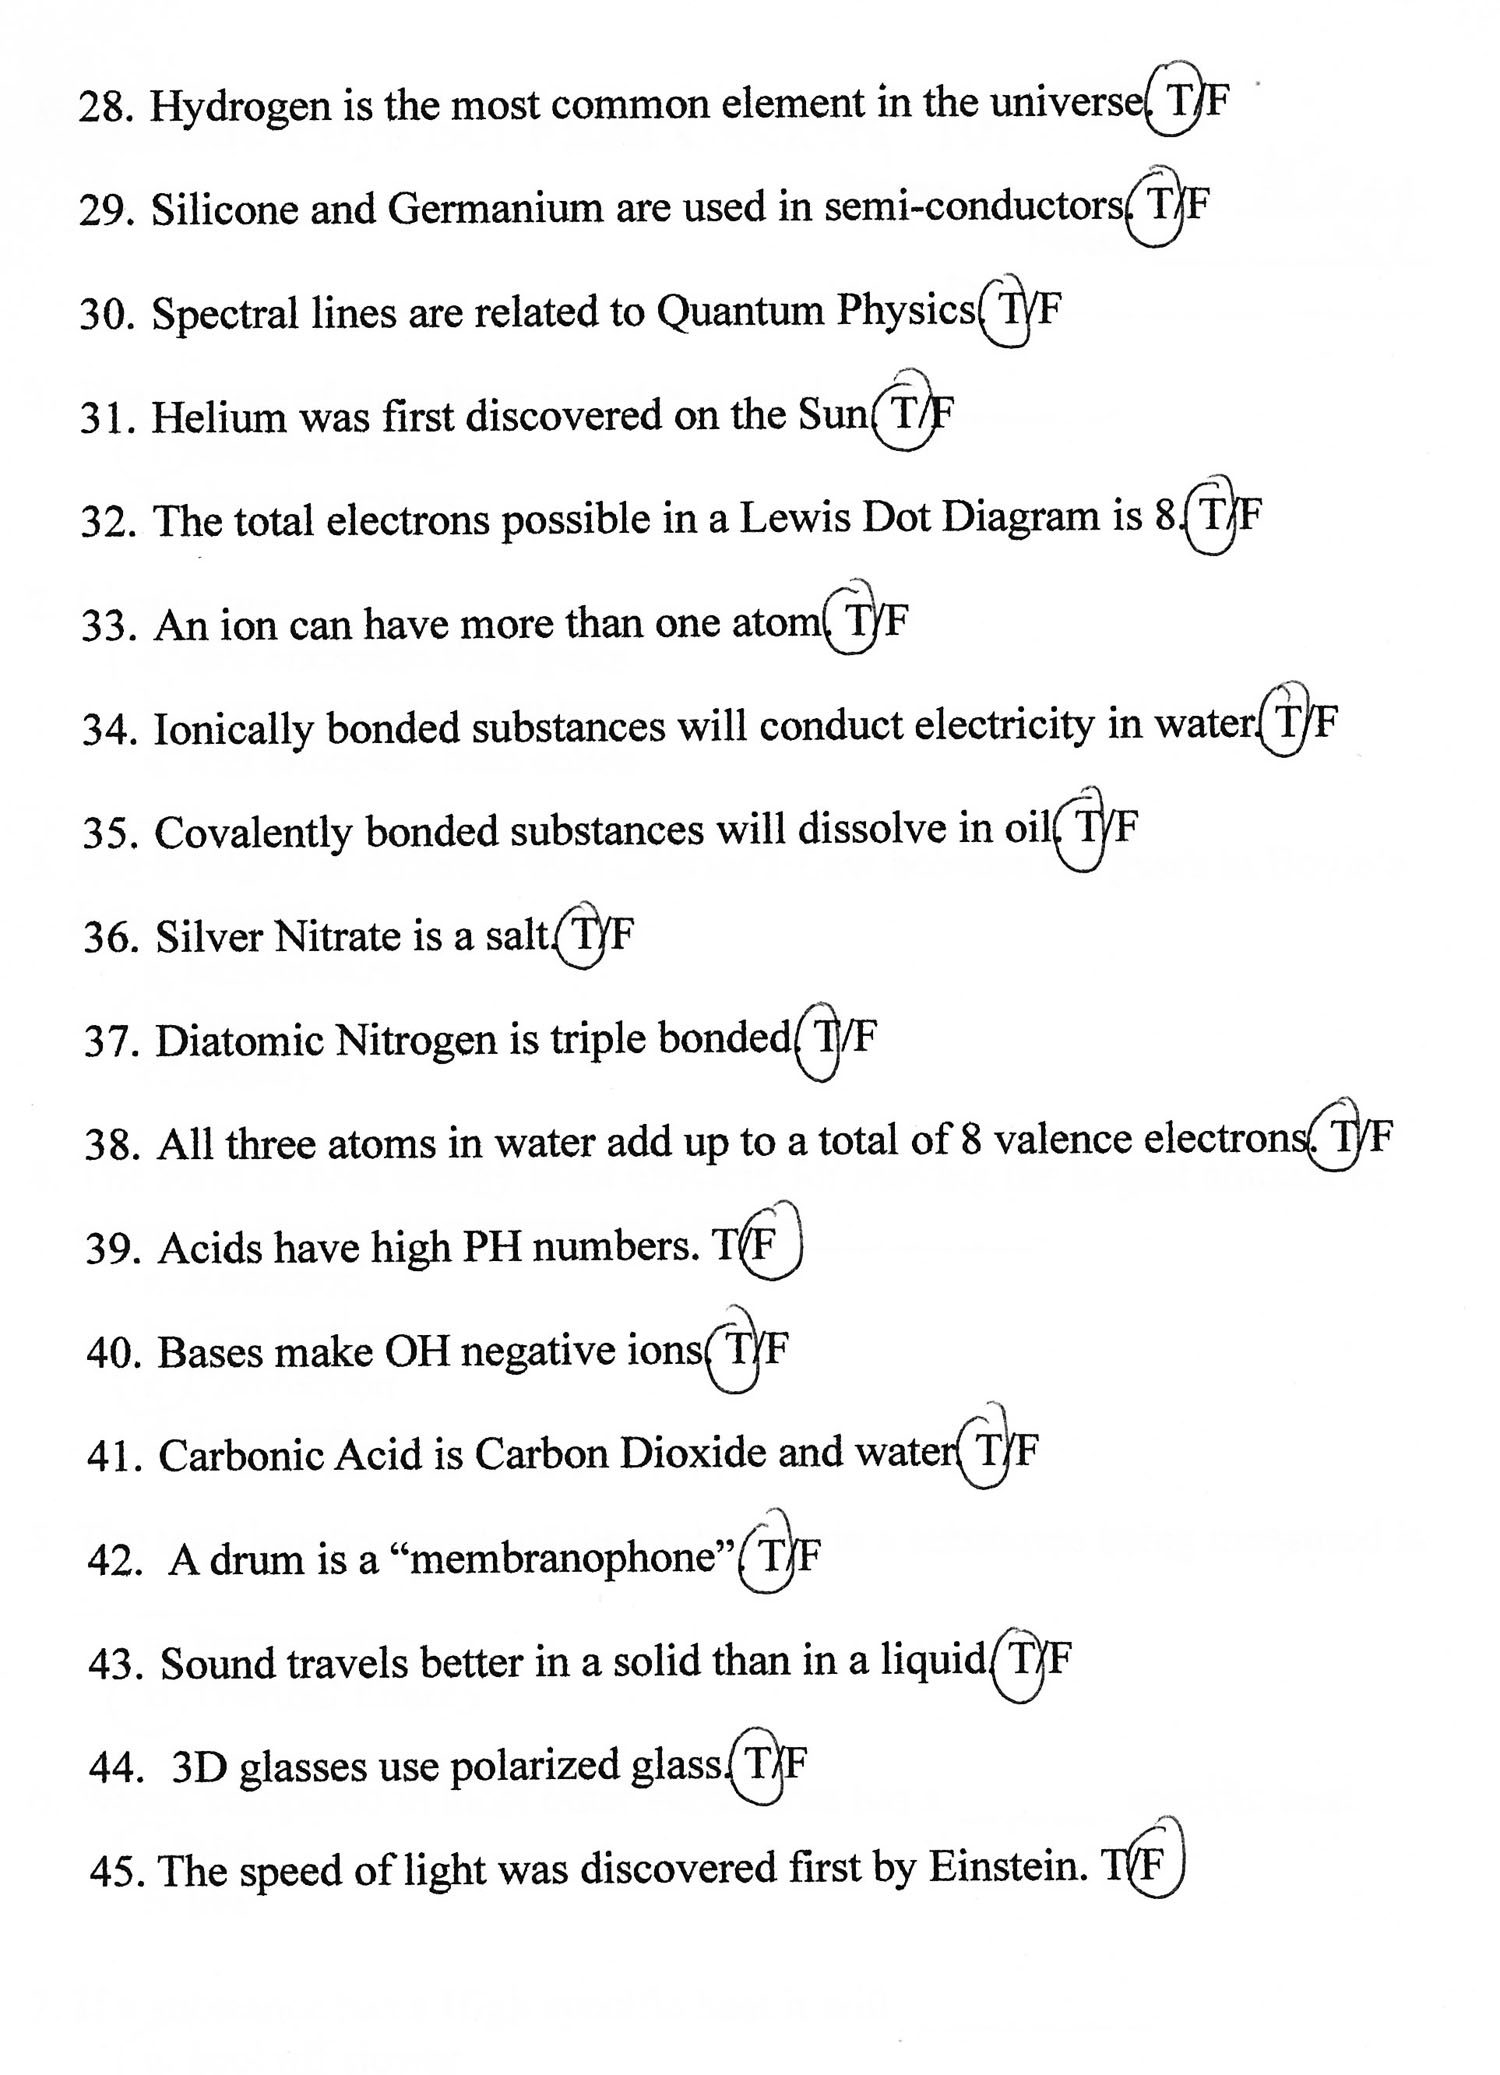 6th Grade Physical Science Worksheets Image